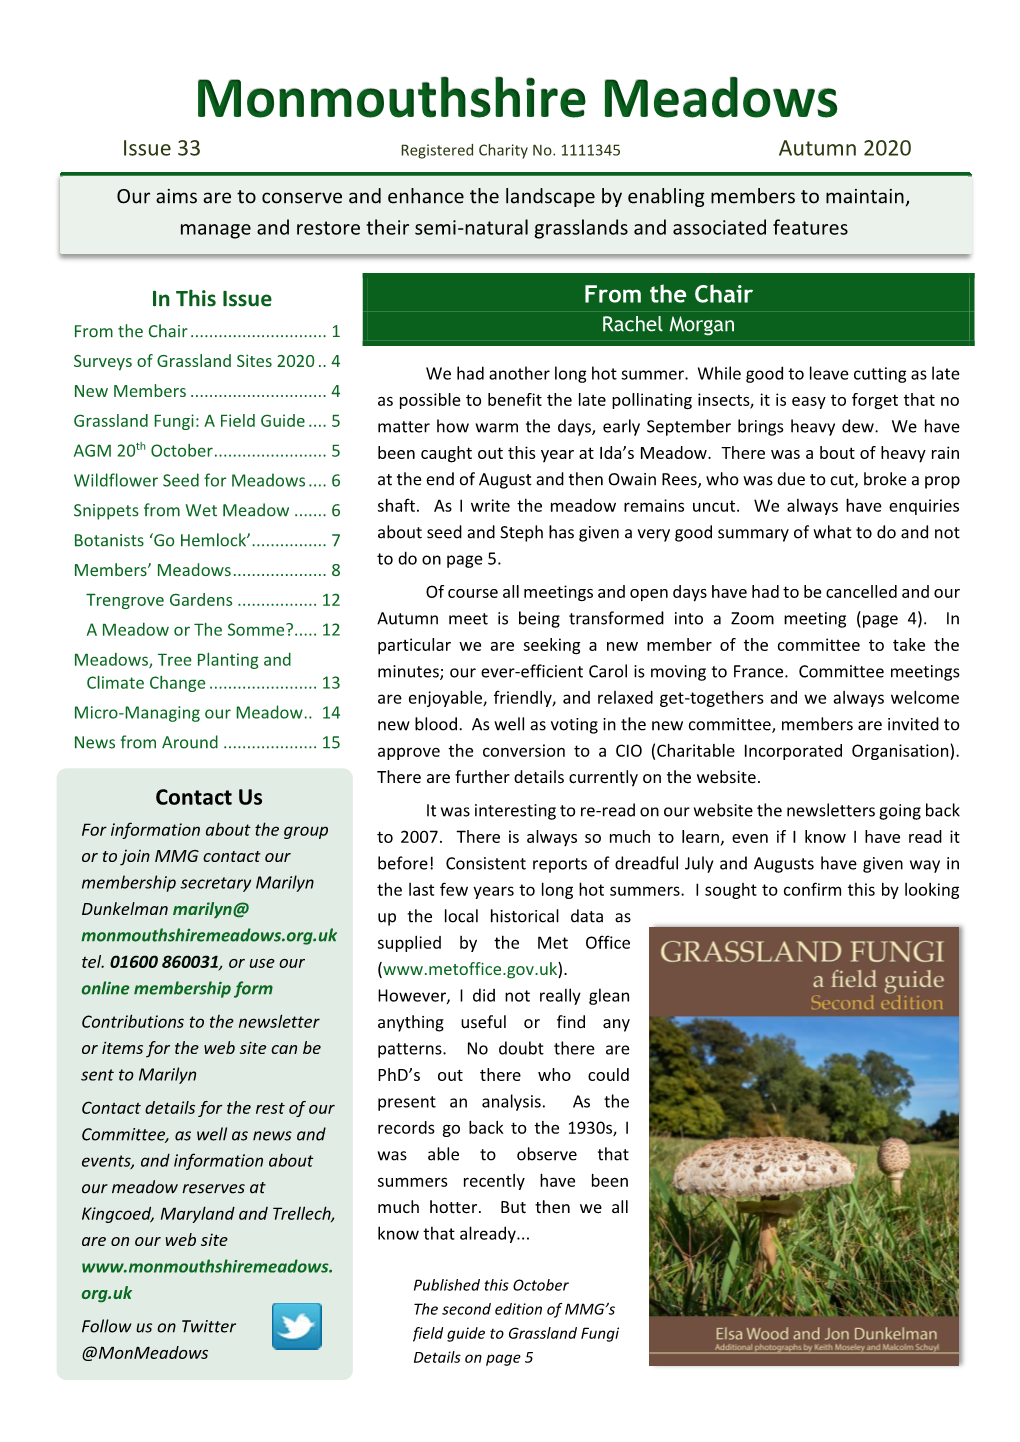 Monmouthshire Meadows Issue 33 Registered Charity No